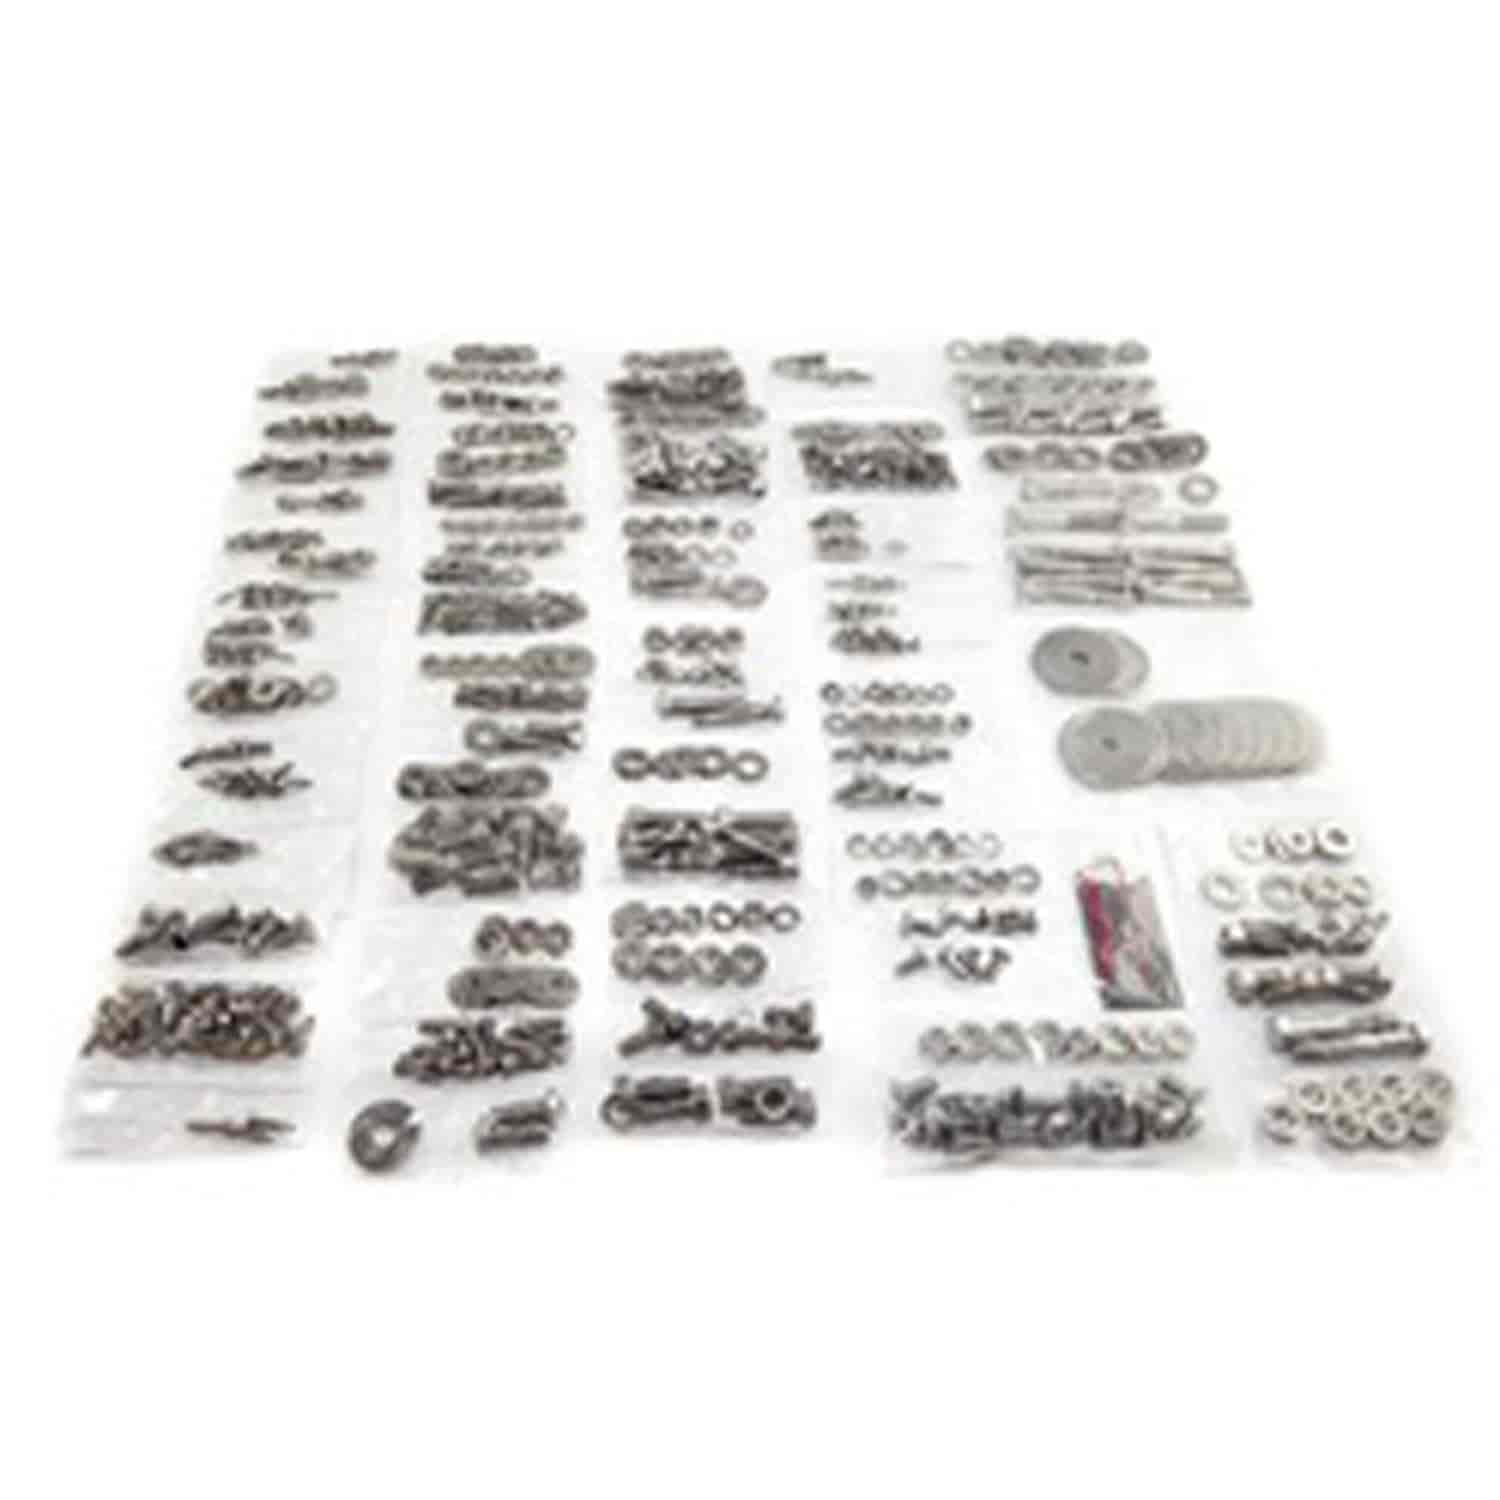 This 714 piece stainless steel body fastener kit from Omix-ADA gives you all the fasteners to rebuil